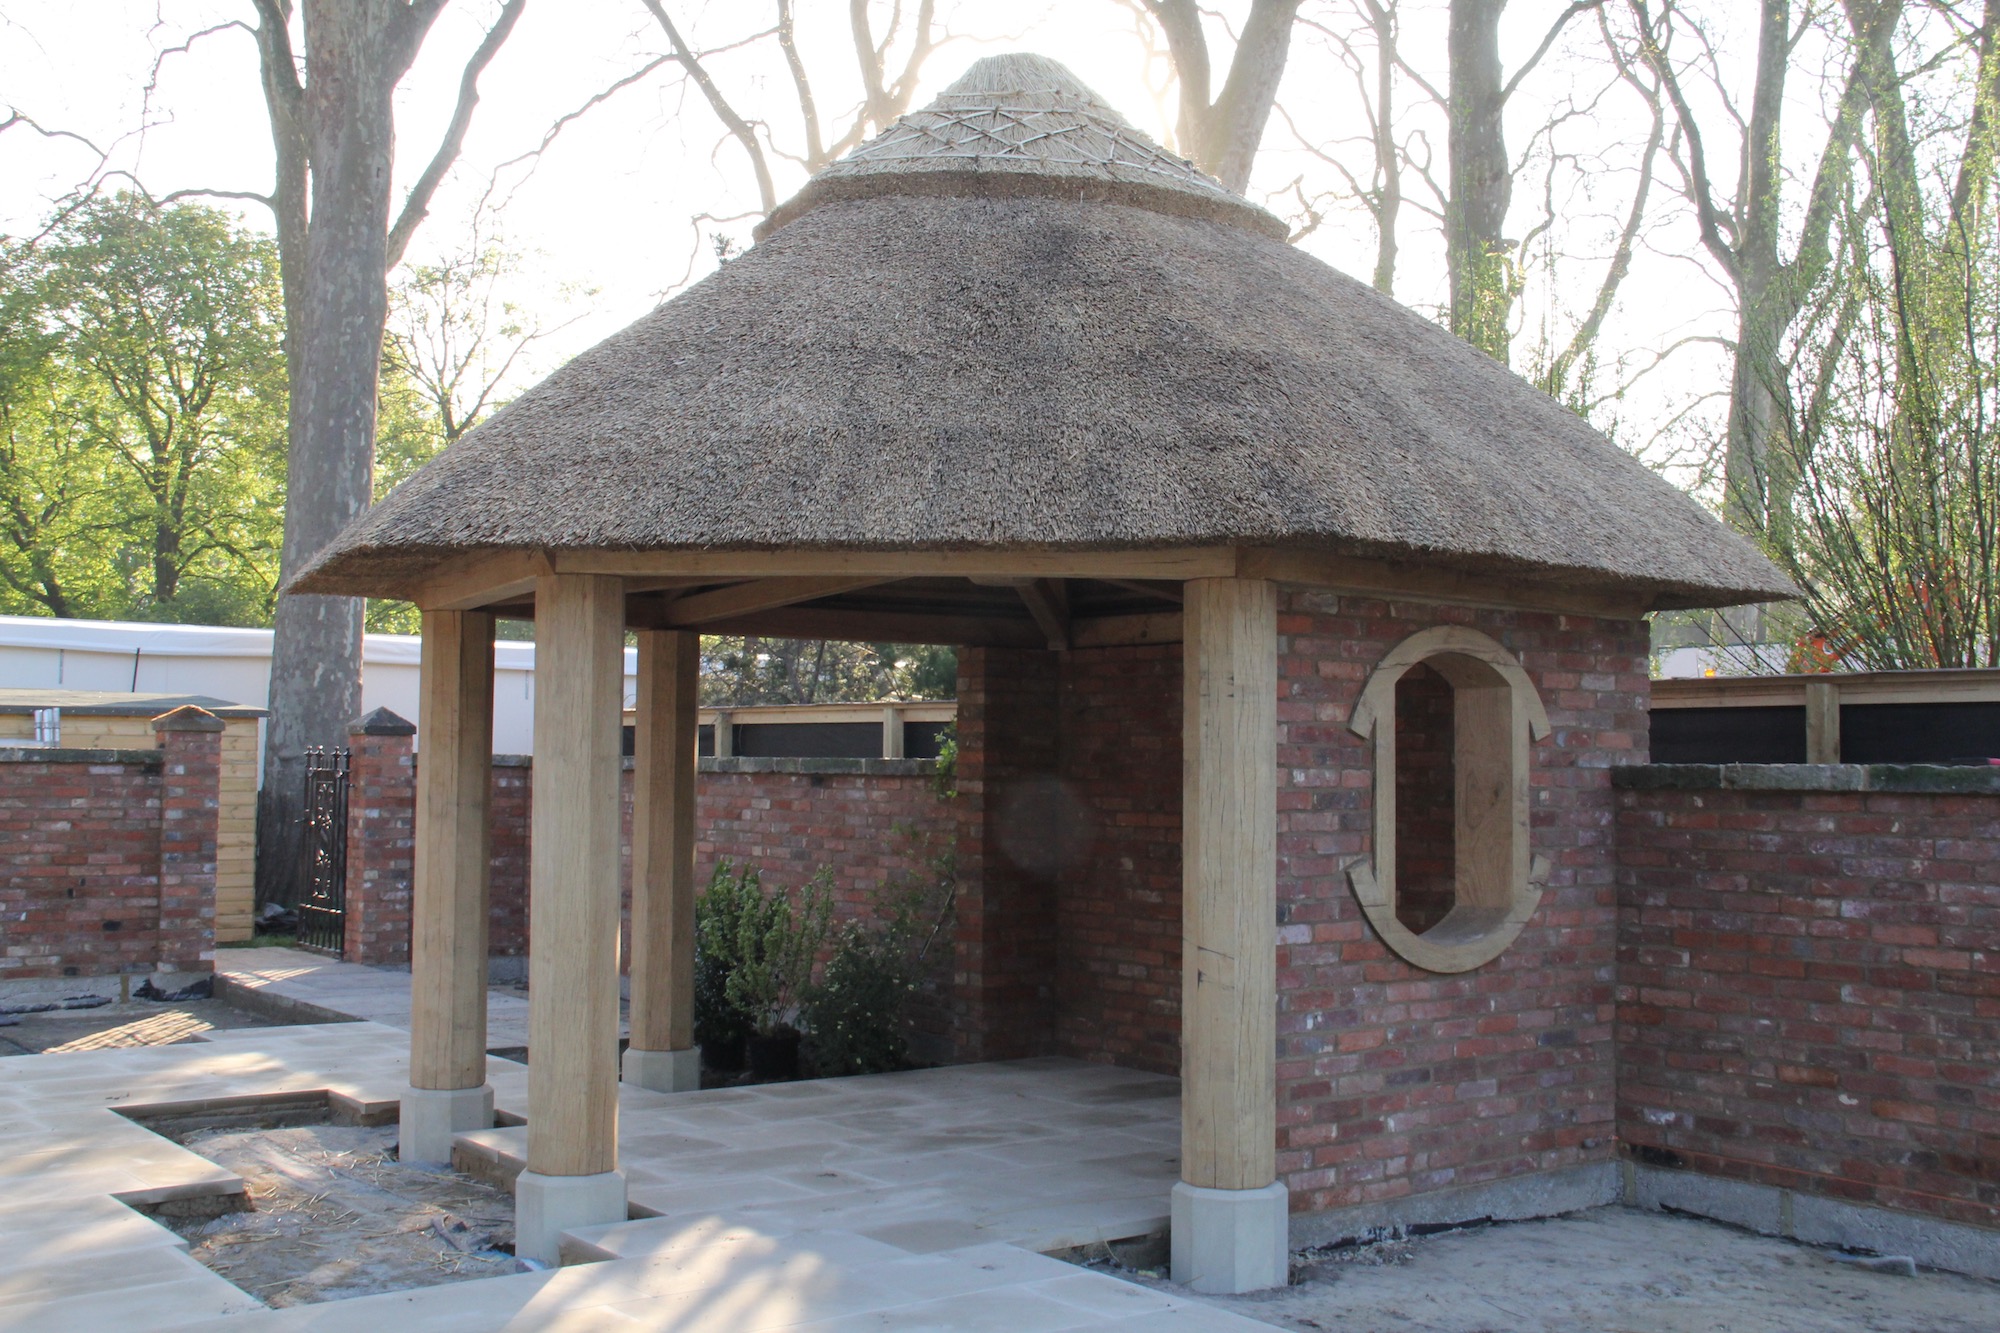 oak summer house with thatched roof, manufacture, supply and installation. This one for The RHS Chelsea Flower Show